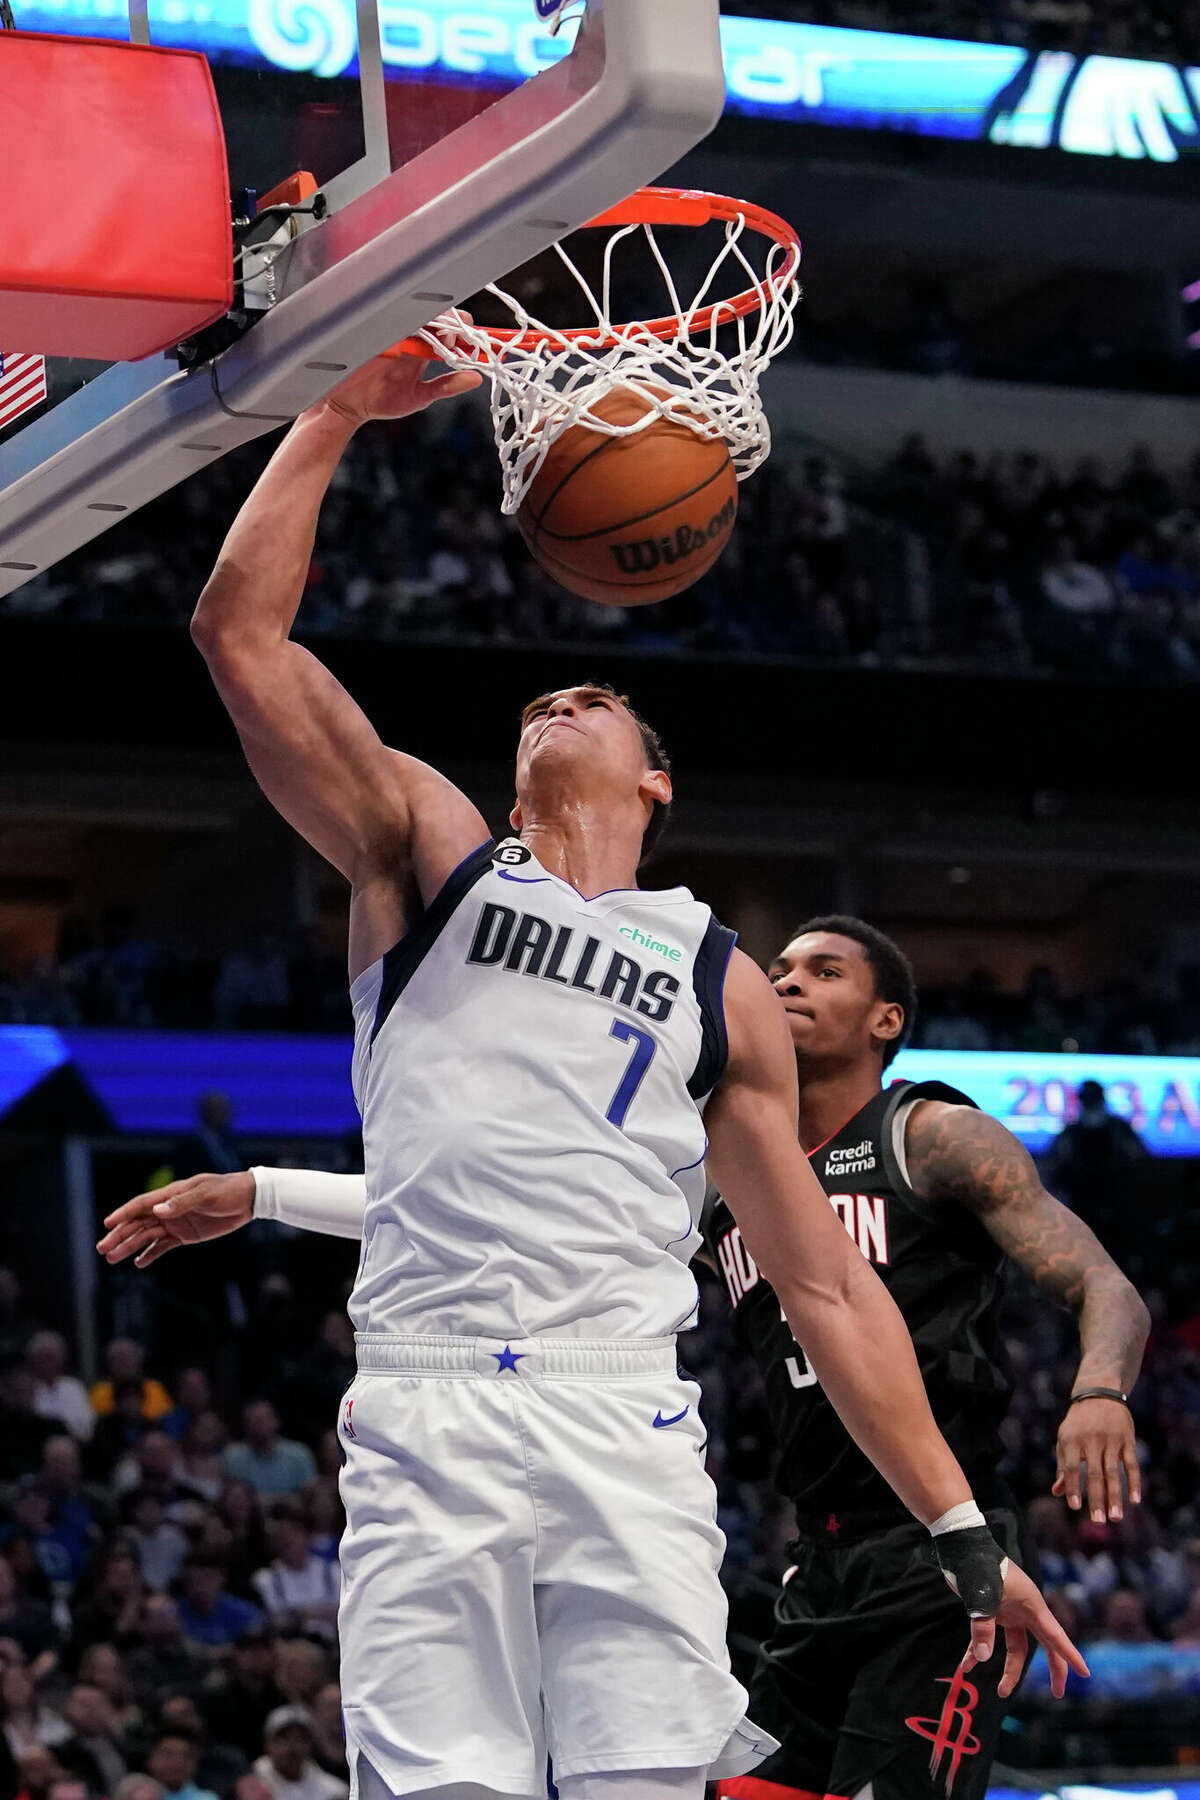 Dallas Mavericks center Dwight Powell (7) scores a basket against Houston Rockets guard Kevin Porter Jr. (3) during the first half of an NBA basketball game in Dallas, Thursday, Dec. 29, 2022. (AP Photo/LM Otero)